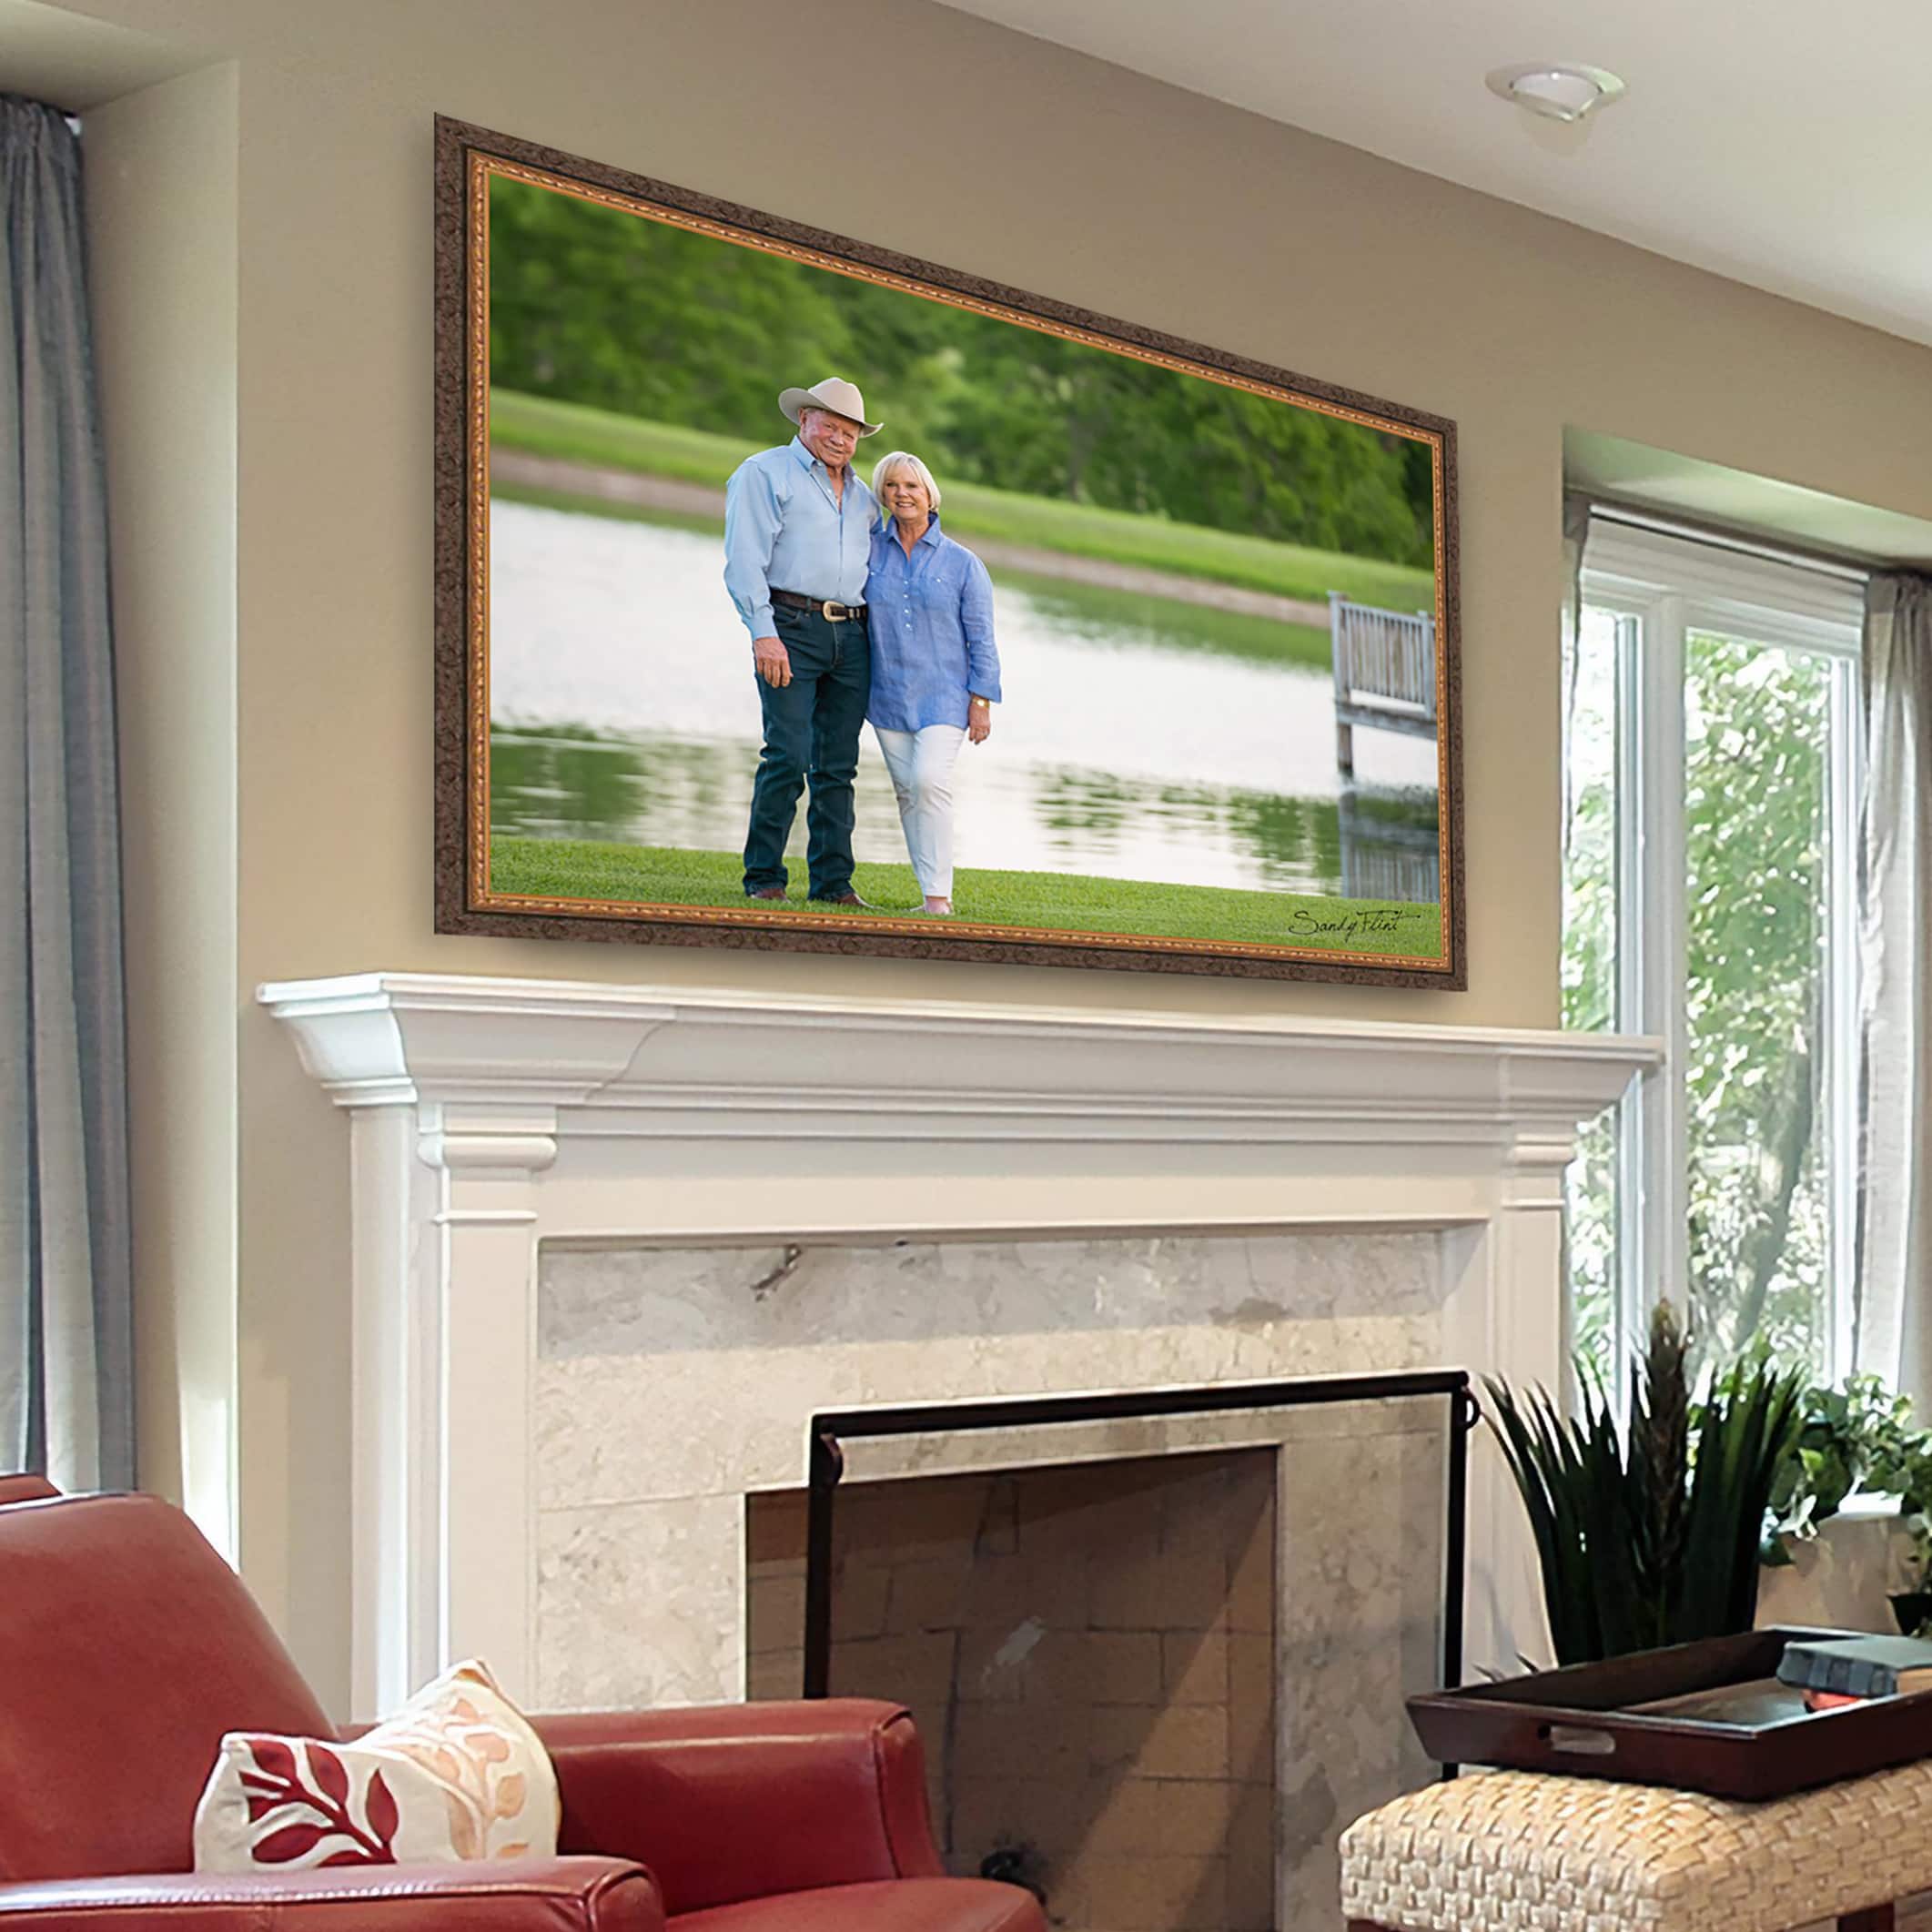 Beautiful couple's portrait displayed above the fireplace made in Chappell Hill, Texas